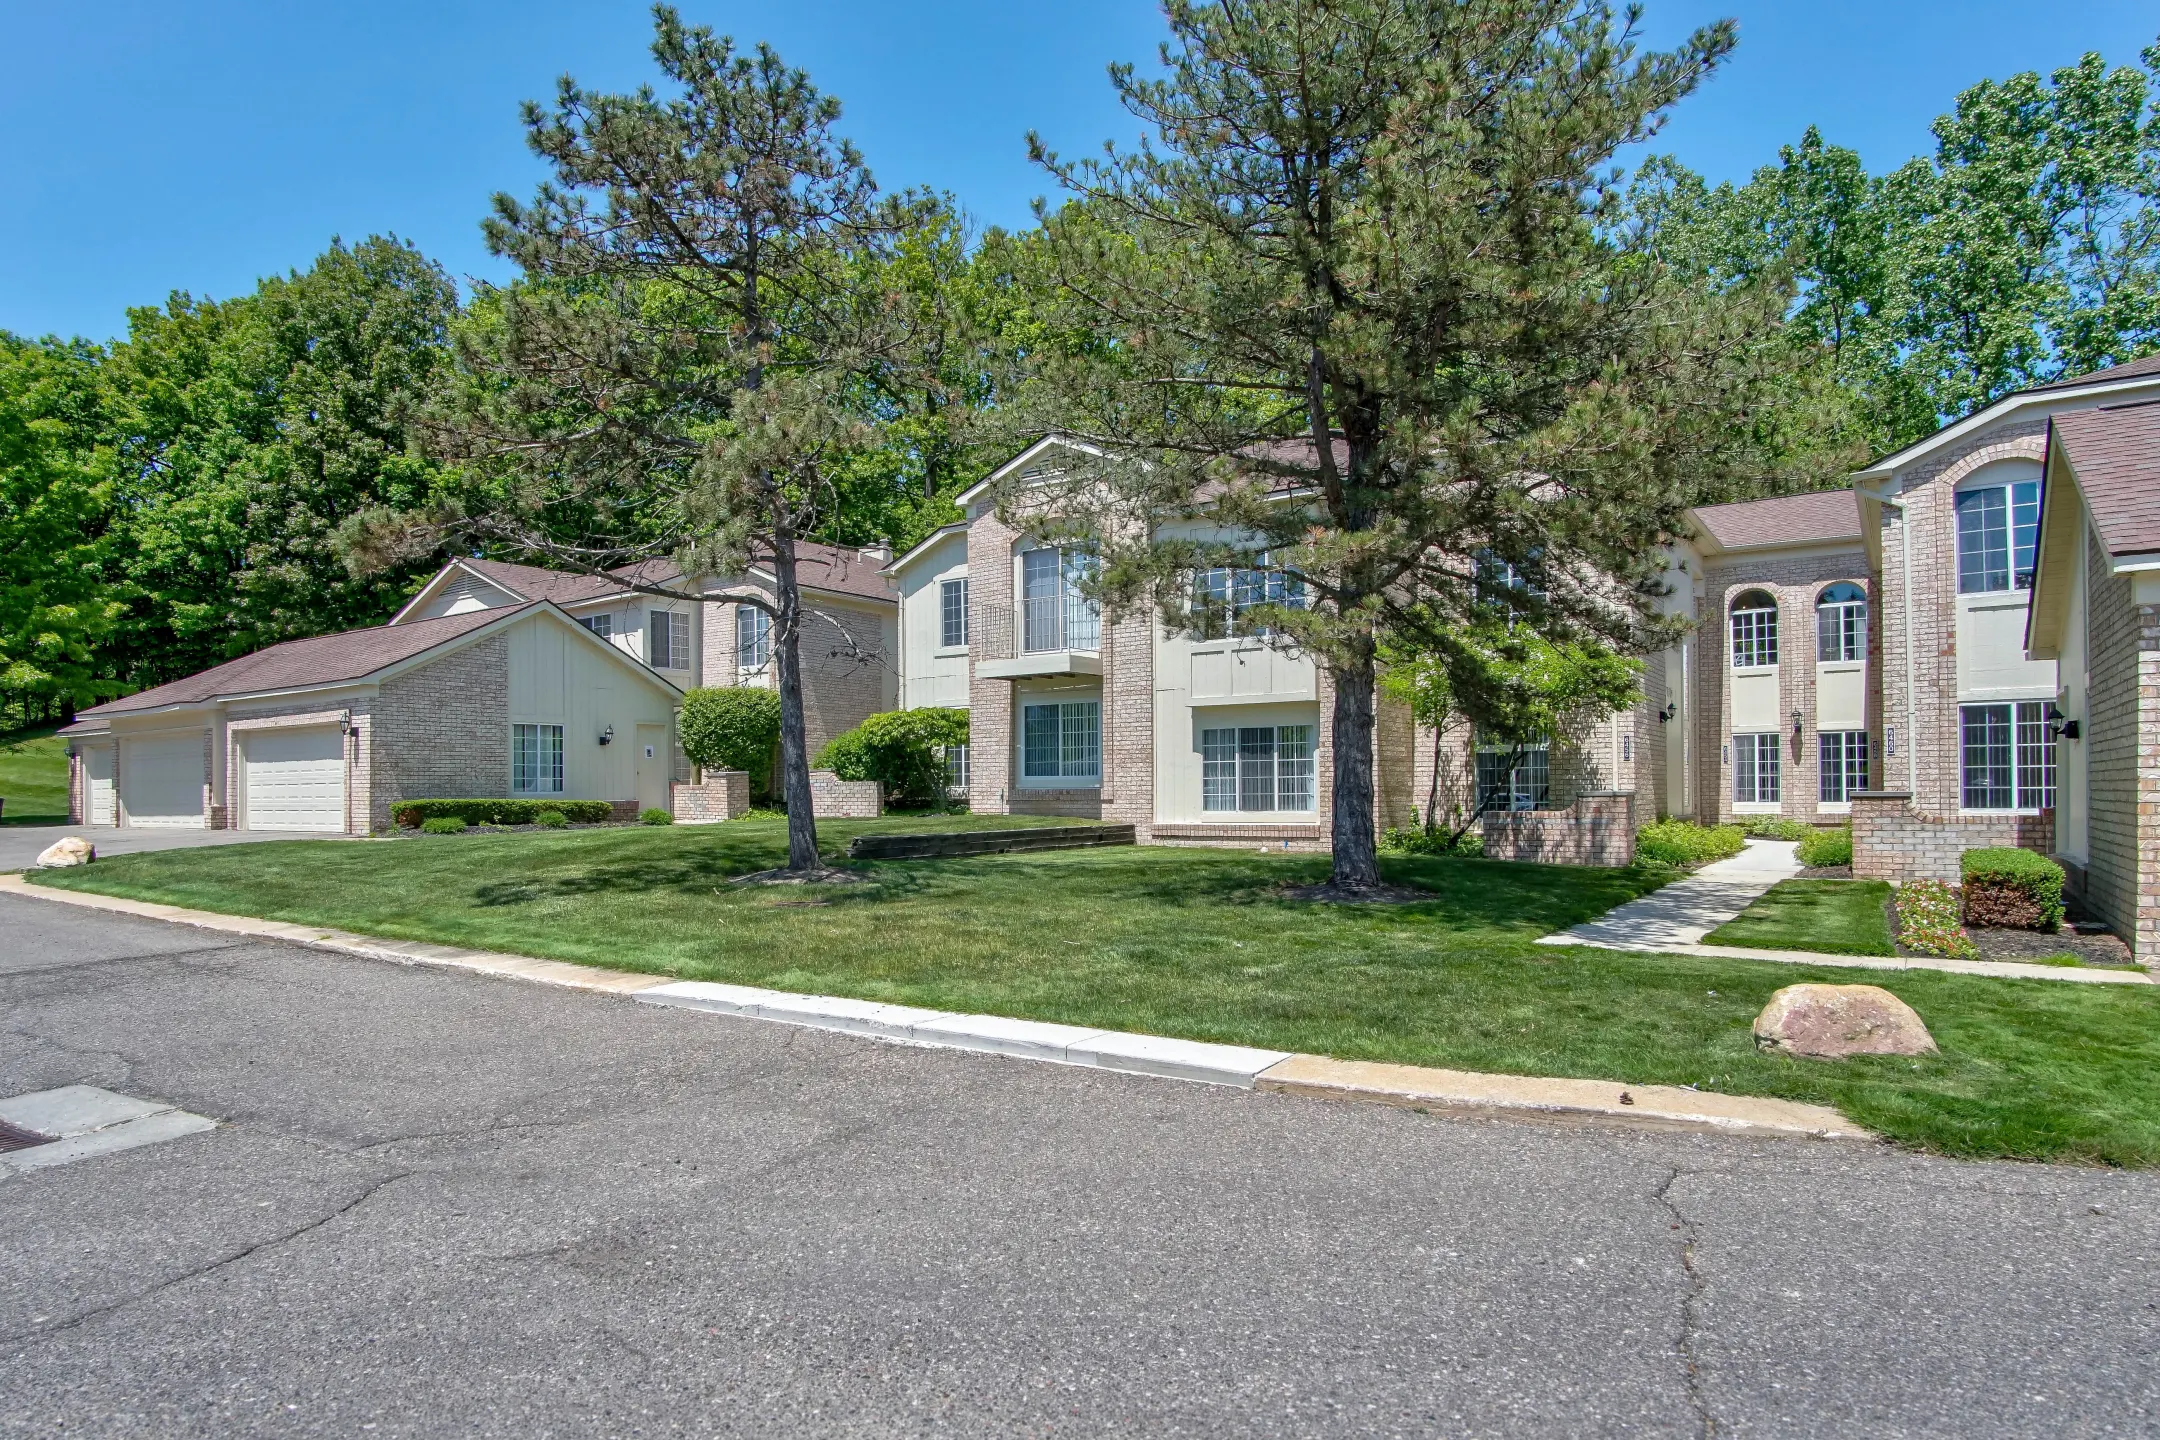 Aldingbrooke Apartments and Townhomes - West Bloomfield, MI